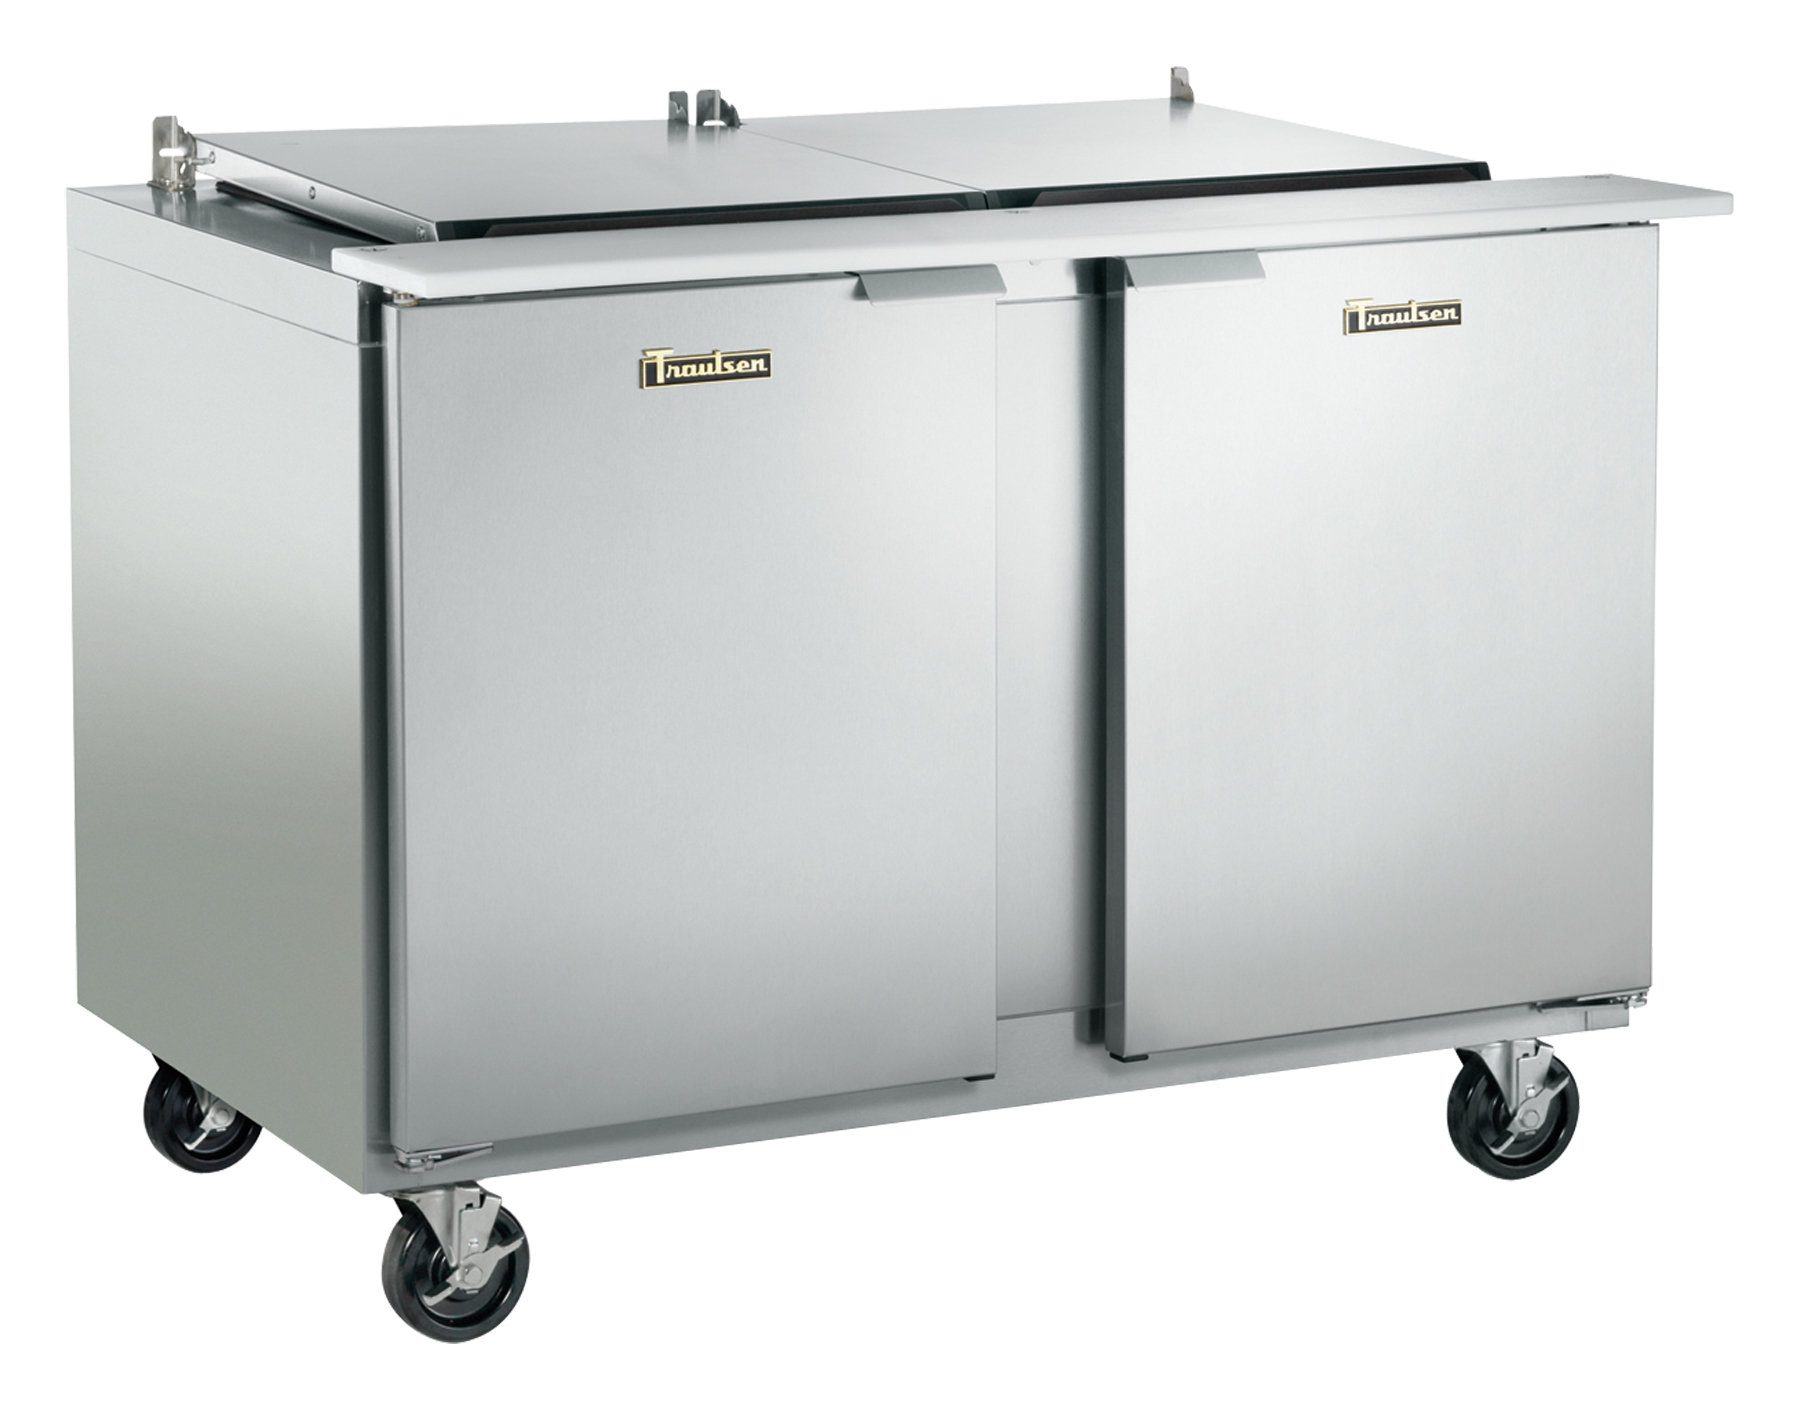 60" COMPACT PREP TABLE REFR